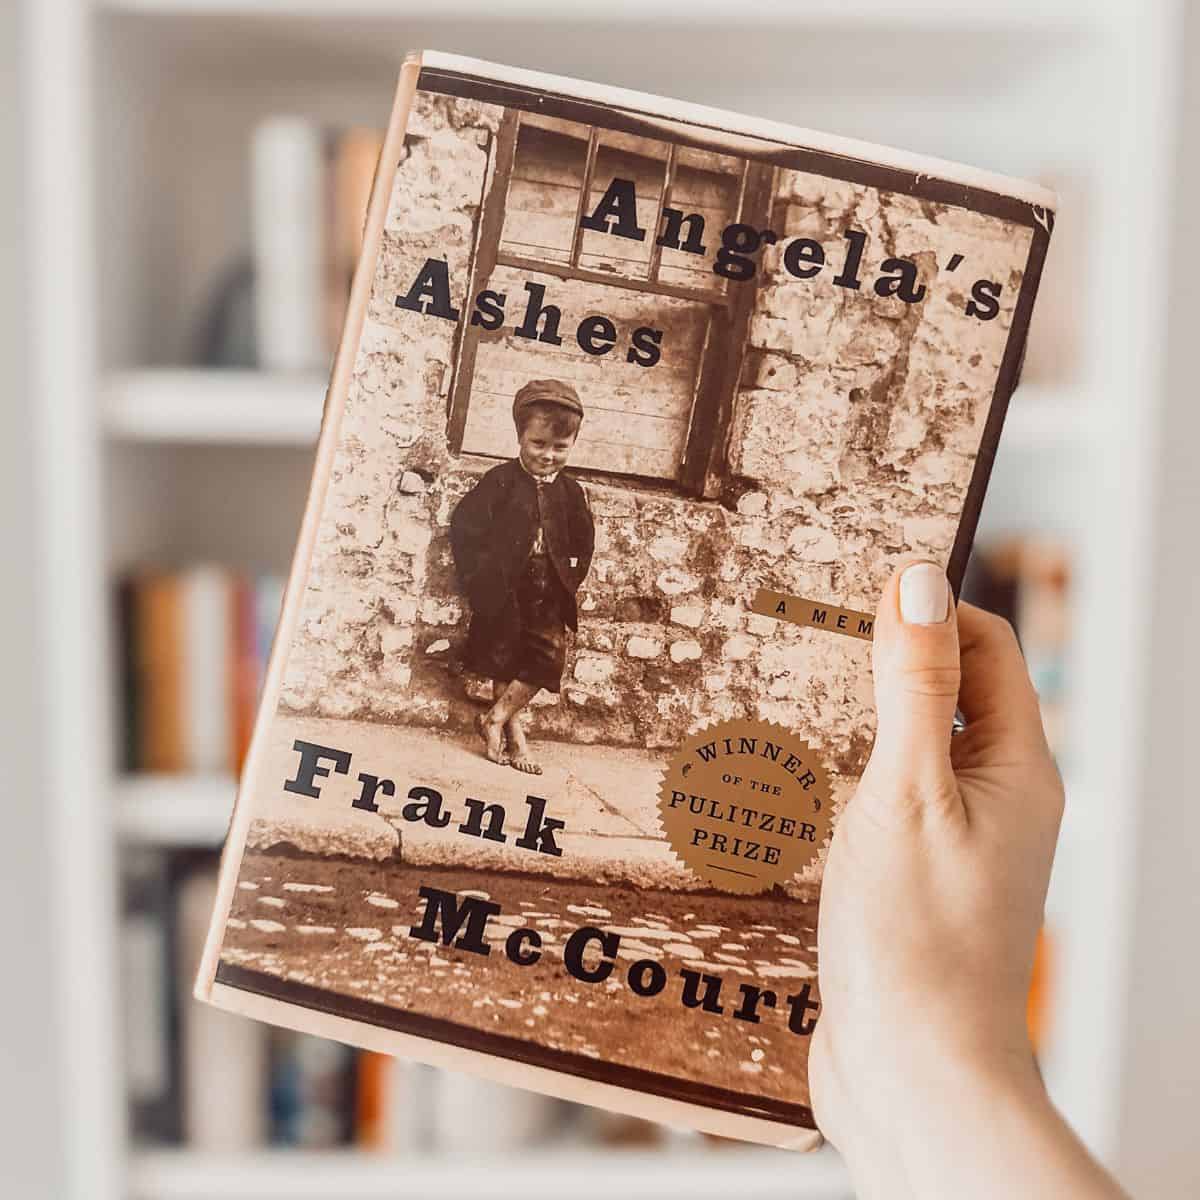 Angela's Ashes by Frank McCourt held in front of a bookshelf.